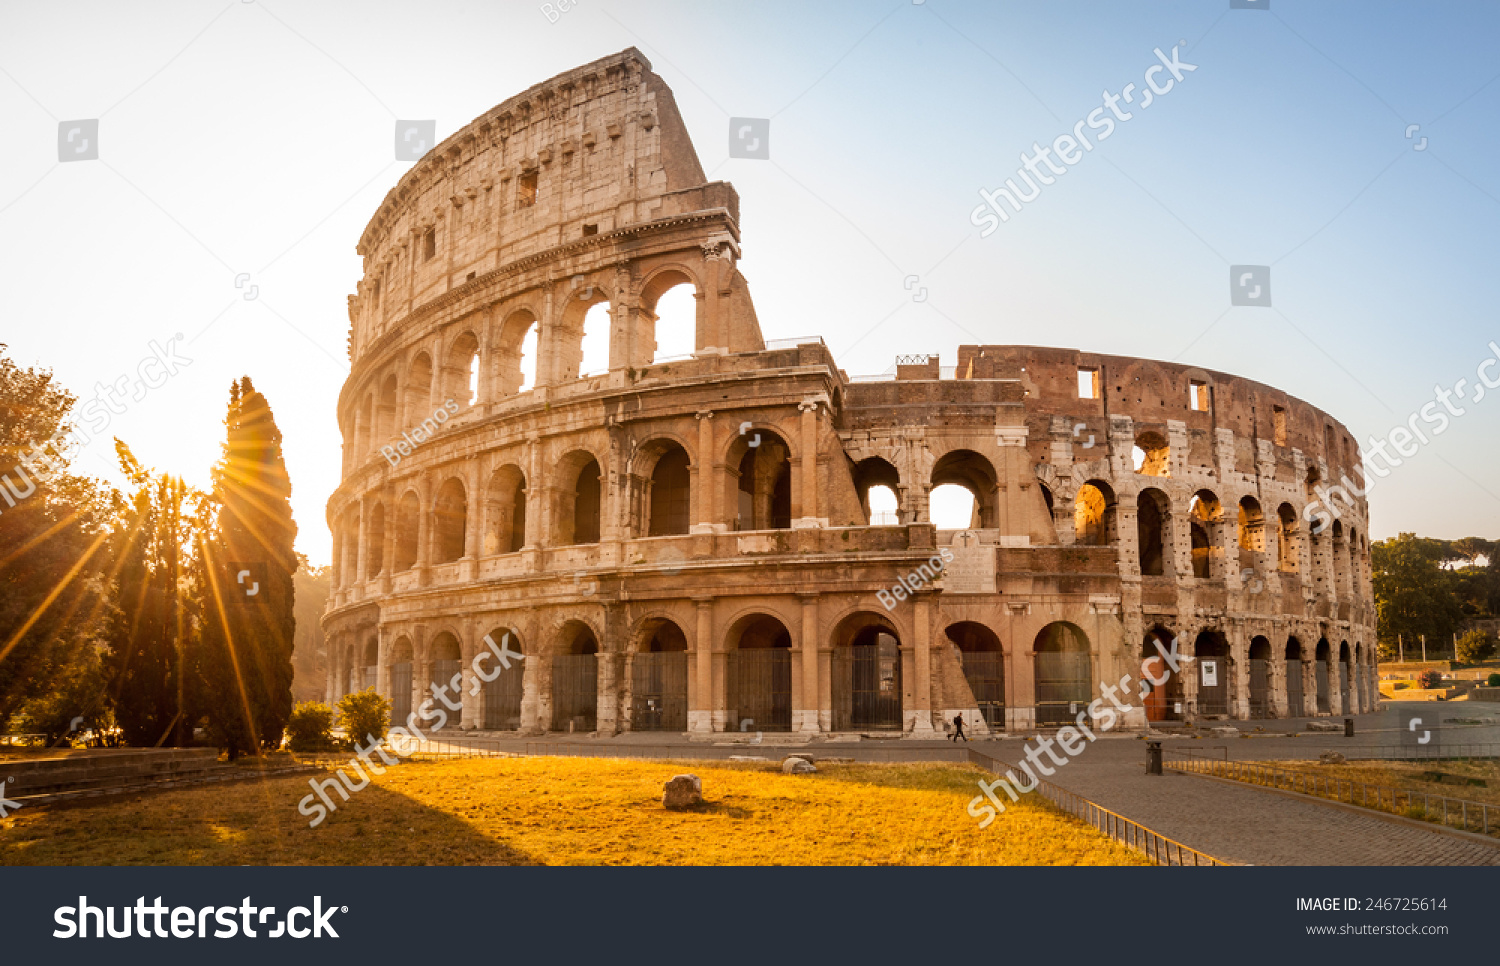 Colosseum at sunrise in Rome, Italy, Europe. Rome ancient arena of gladiator fights. Rome Colosseum is the best known landmark of Rome and Italy #246725614